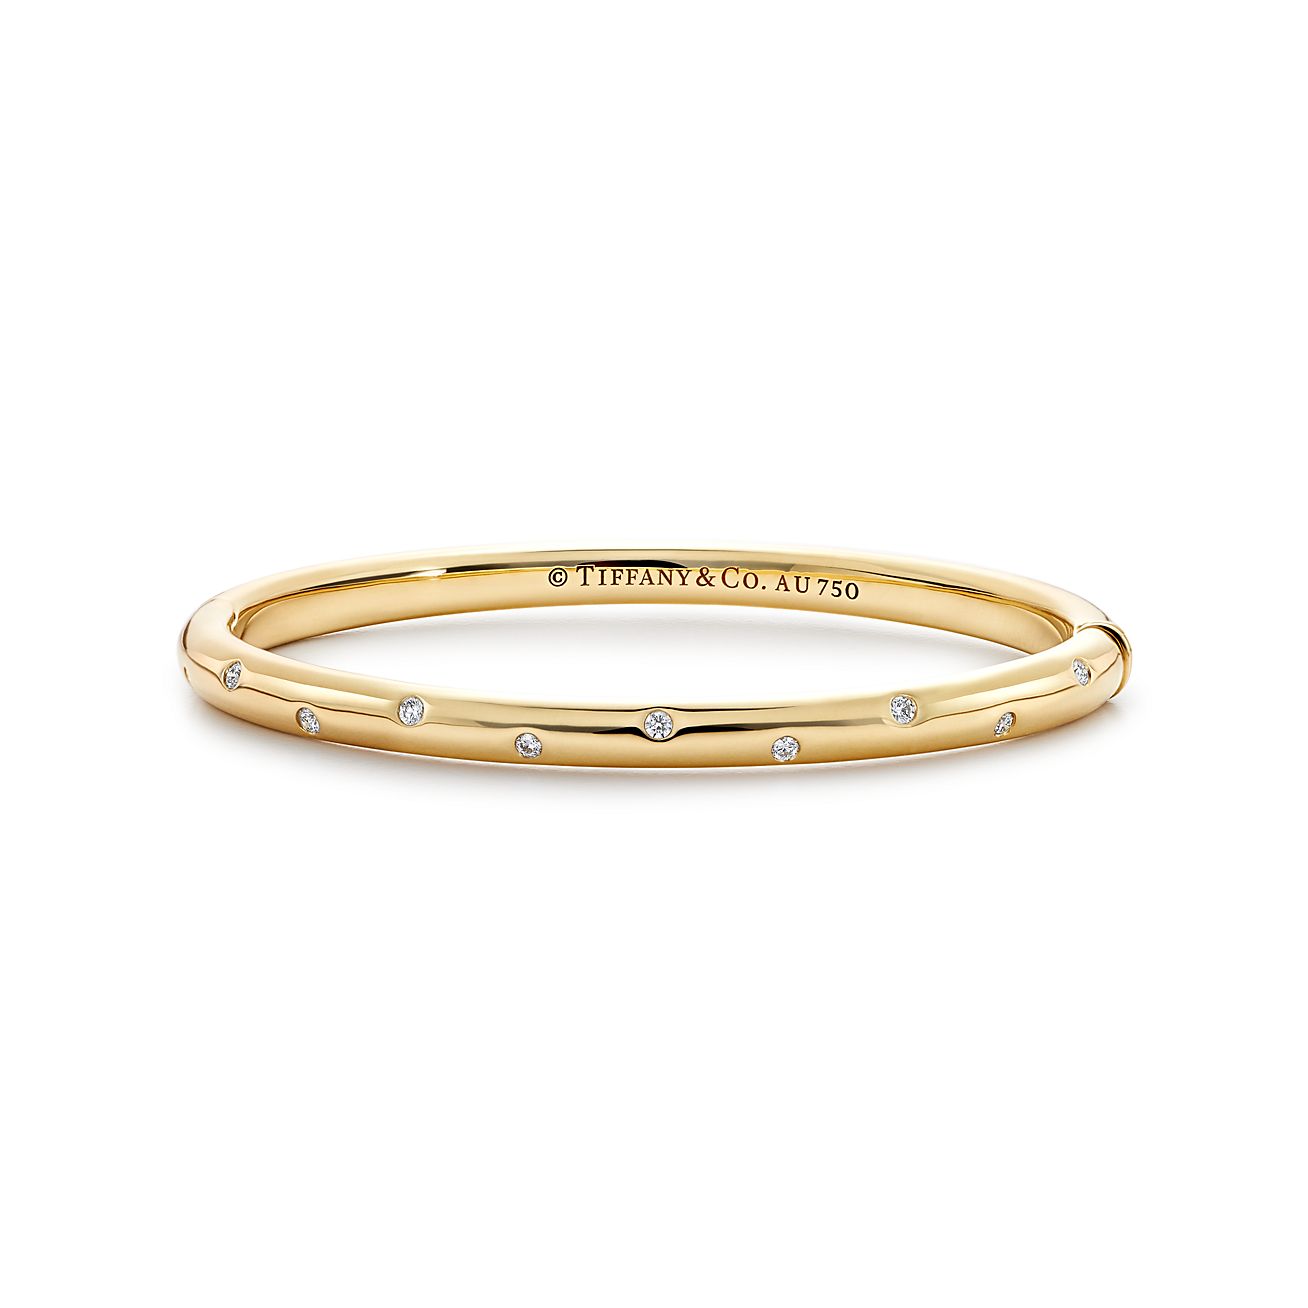 Etoile bangle in 18k gold with round 